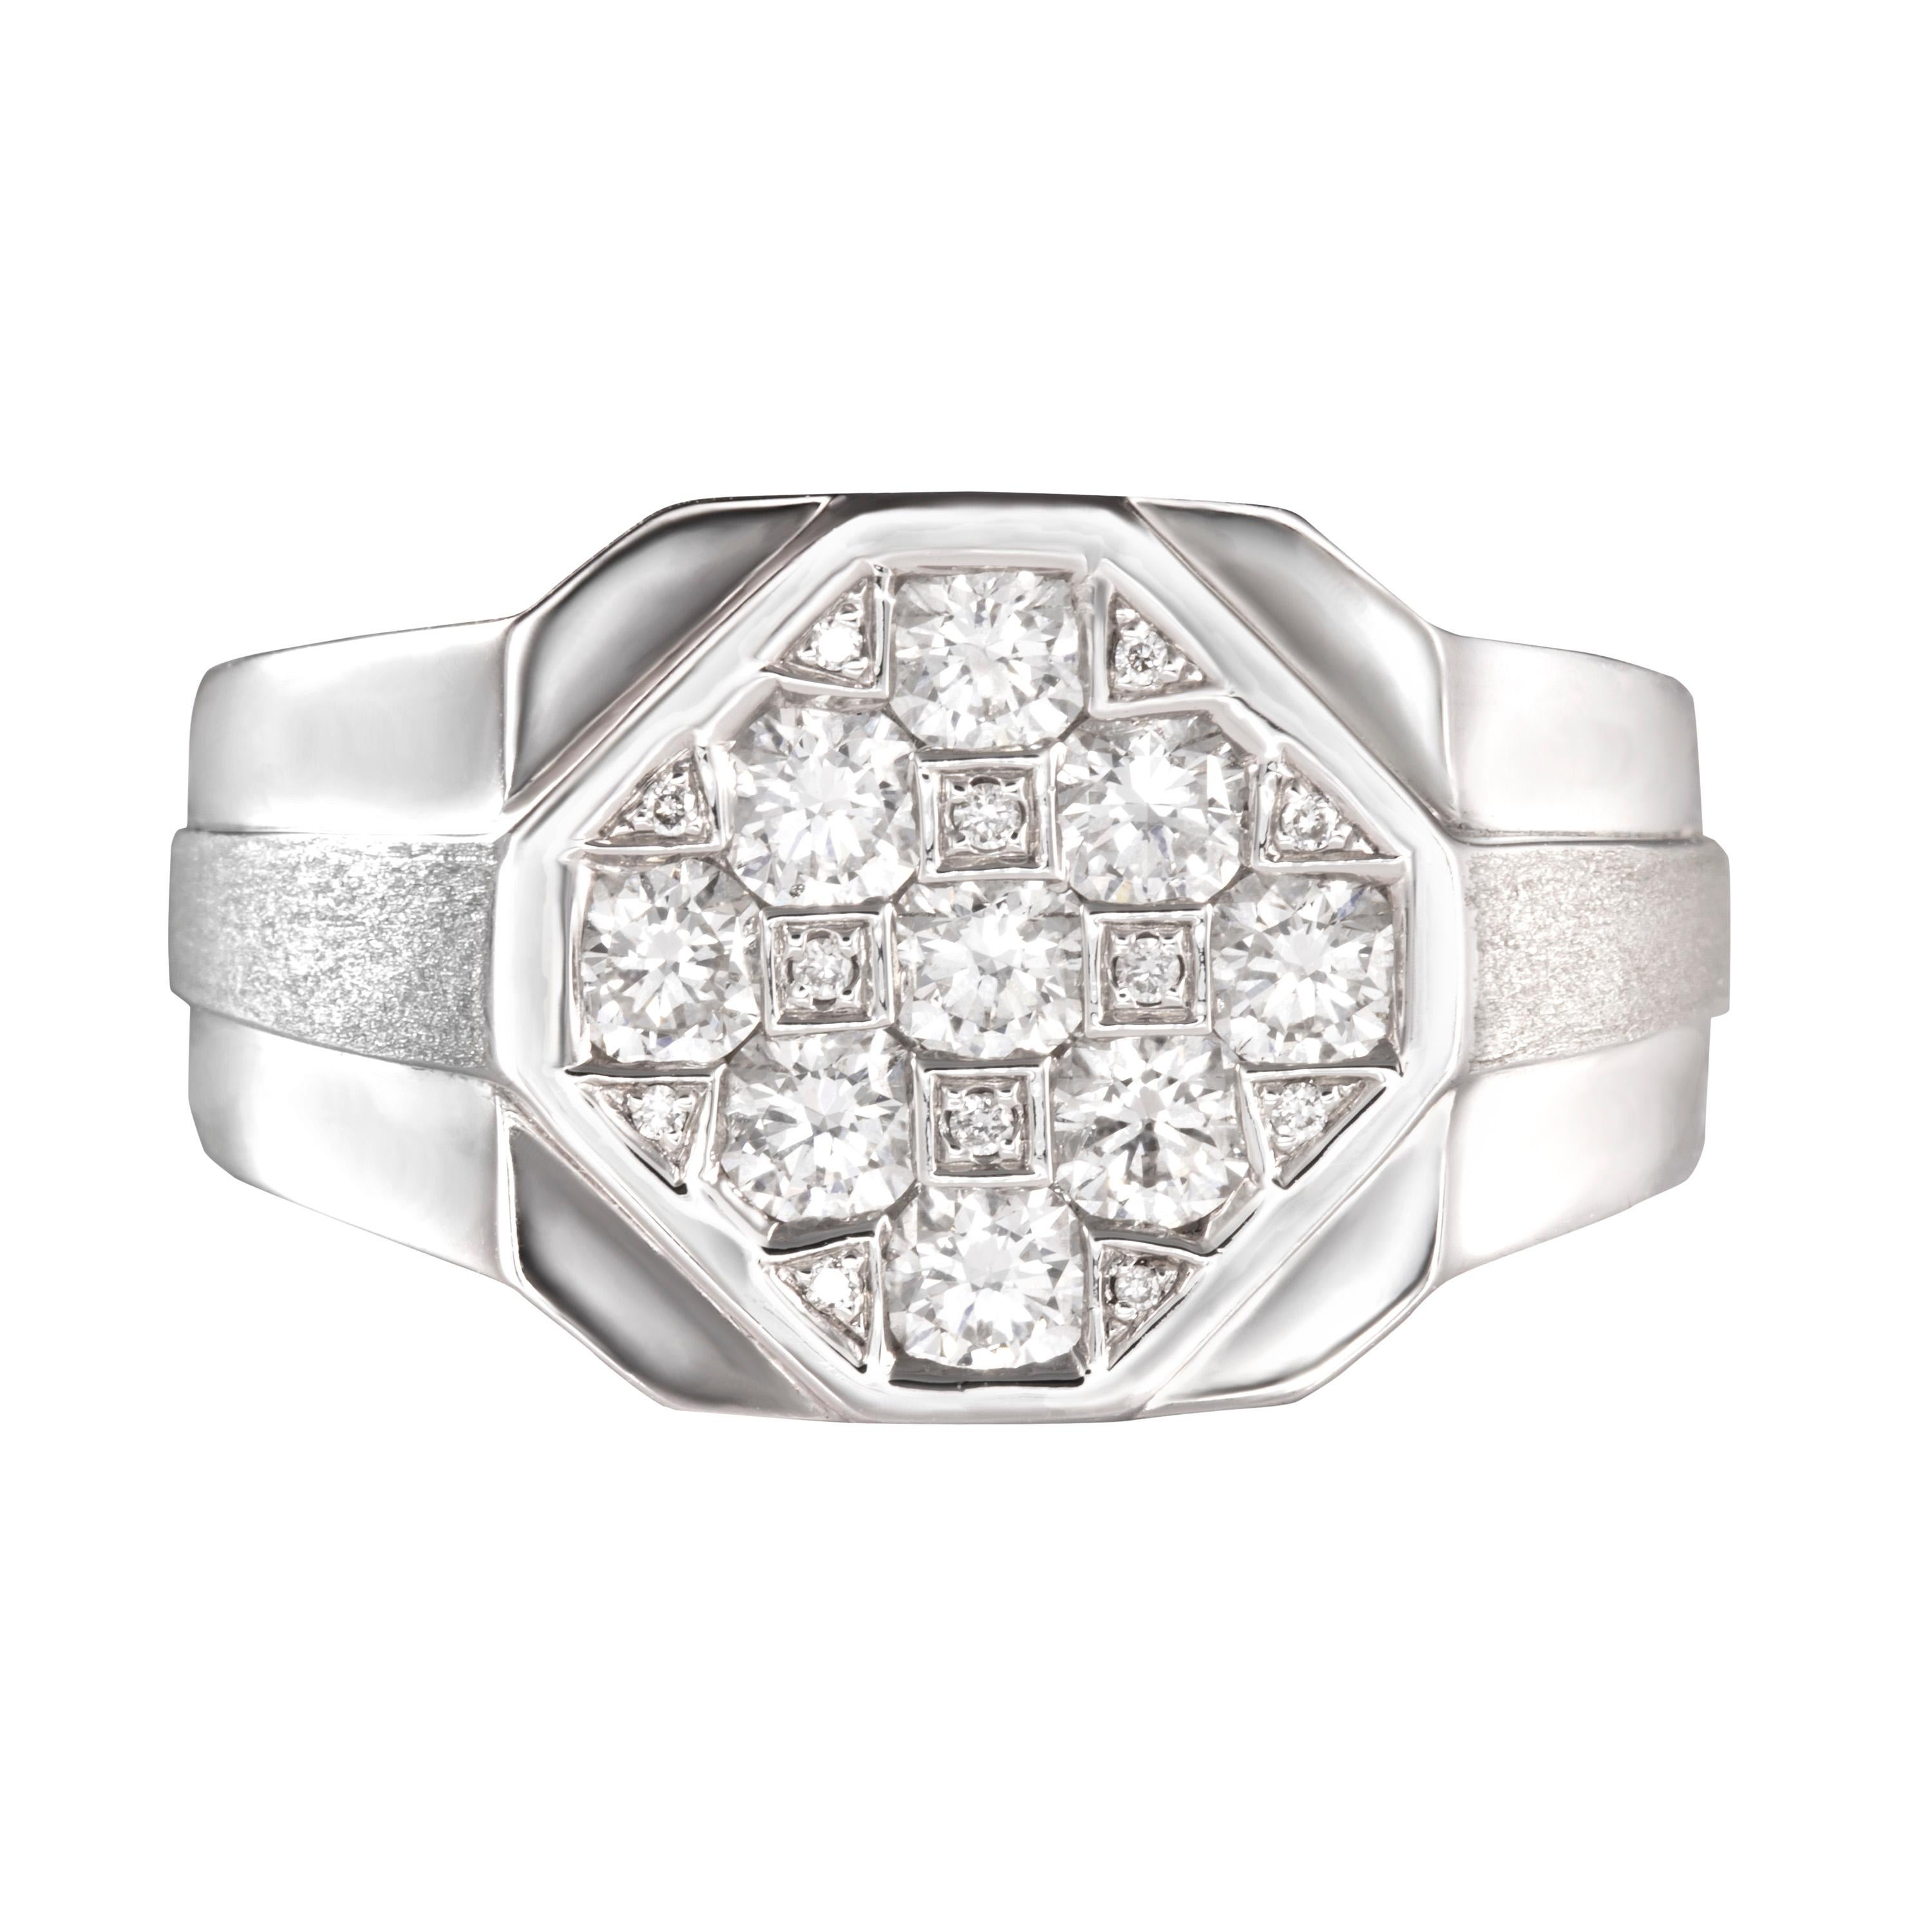 Encrusted with a stunning array of 1.24 carats of diamonds, Butani's ring is fashioned in a sleek geometric design and molded from 18-karat white gold.  Currently a ring size US 10.  For other sizes, please contact seller. 

Composition: 
18K White